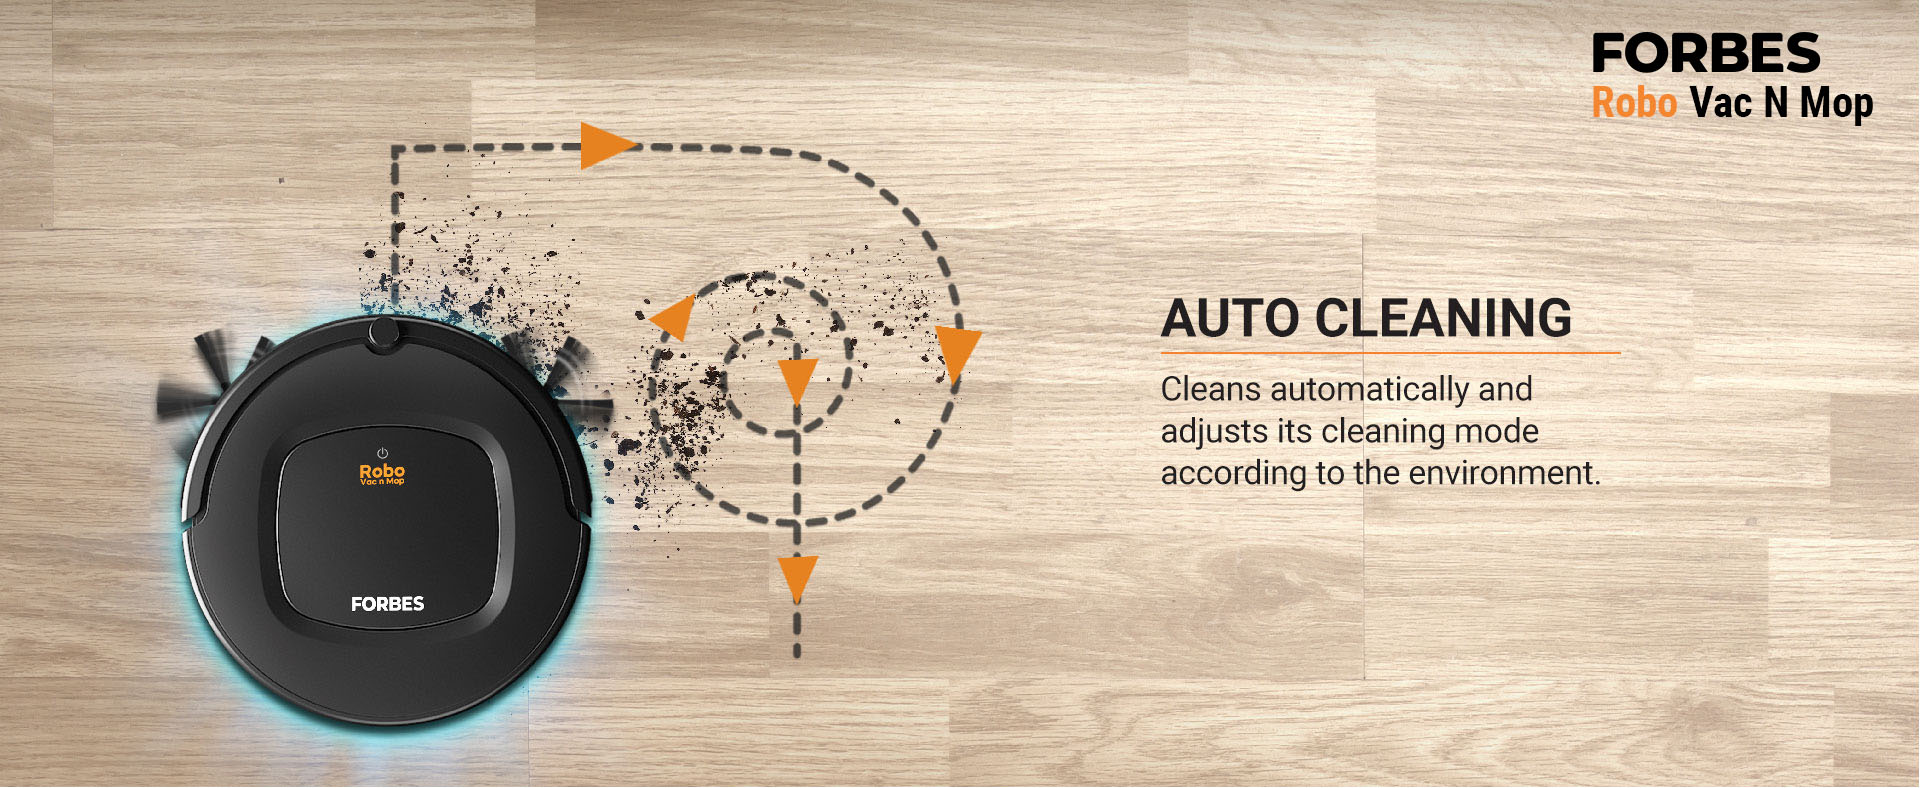 Cleans automatically and adjusts its cleaning mode according to the environment.